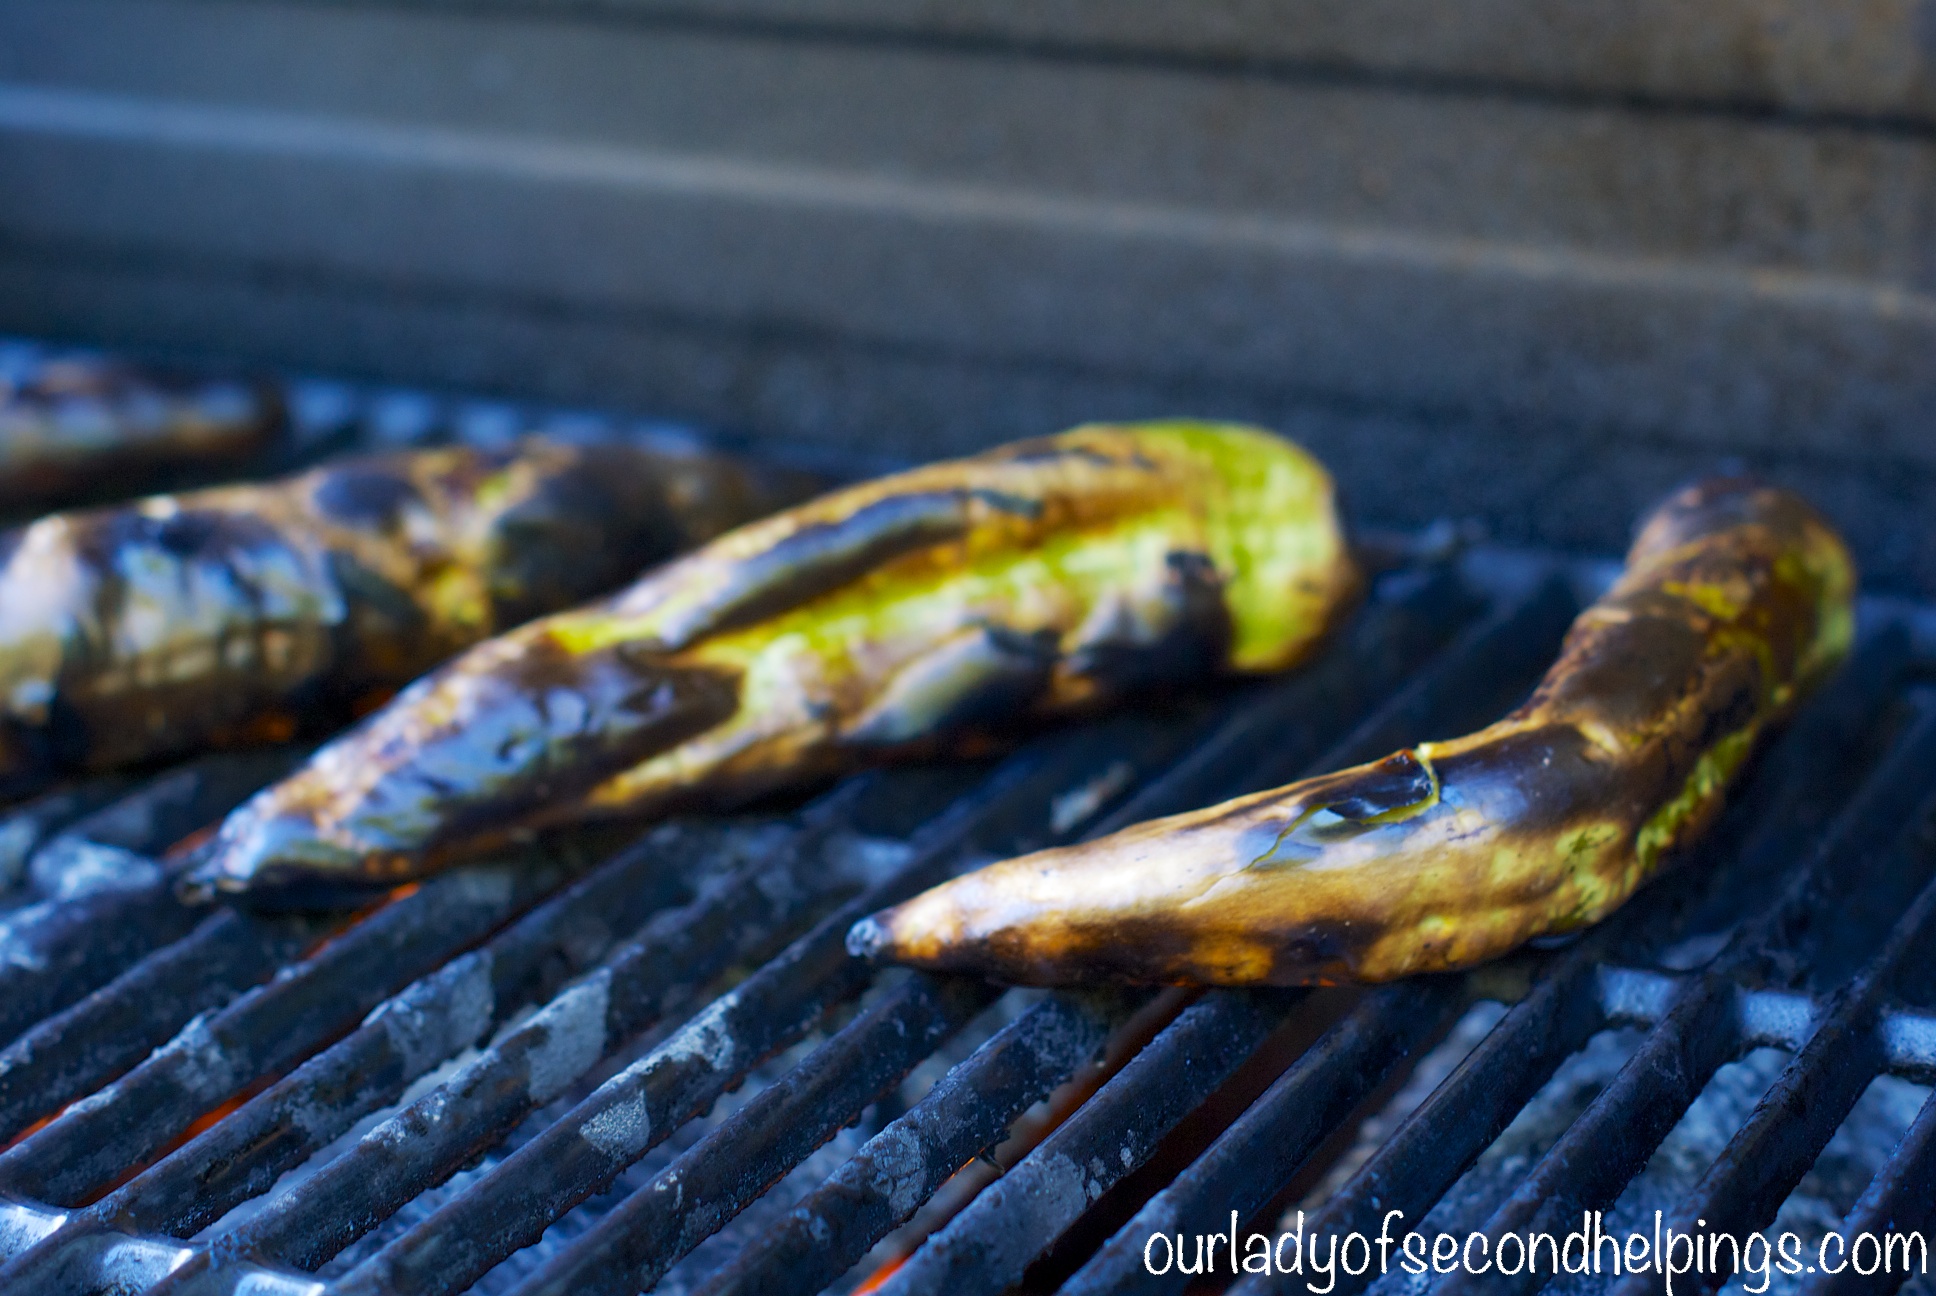 Hatch Chilies on a Grill